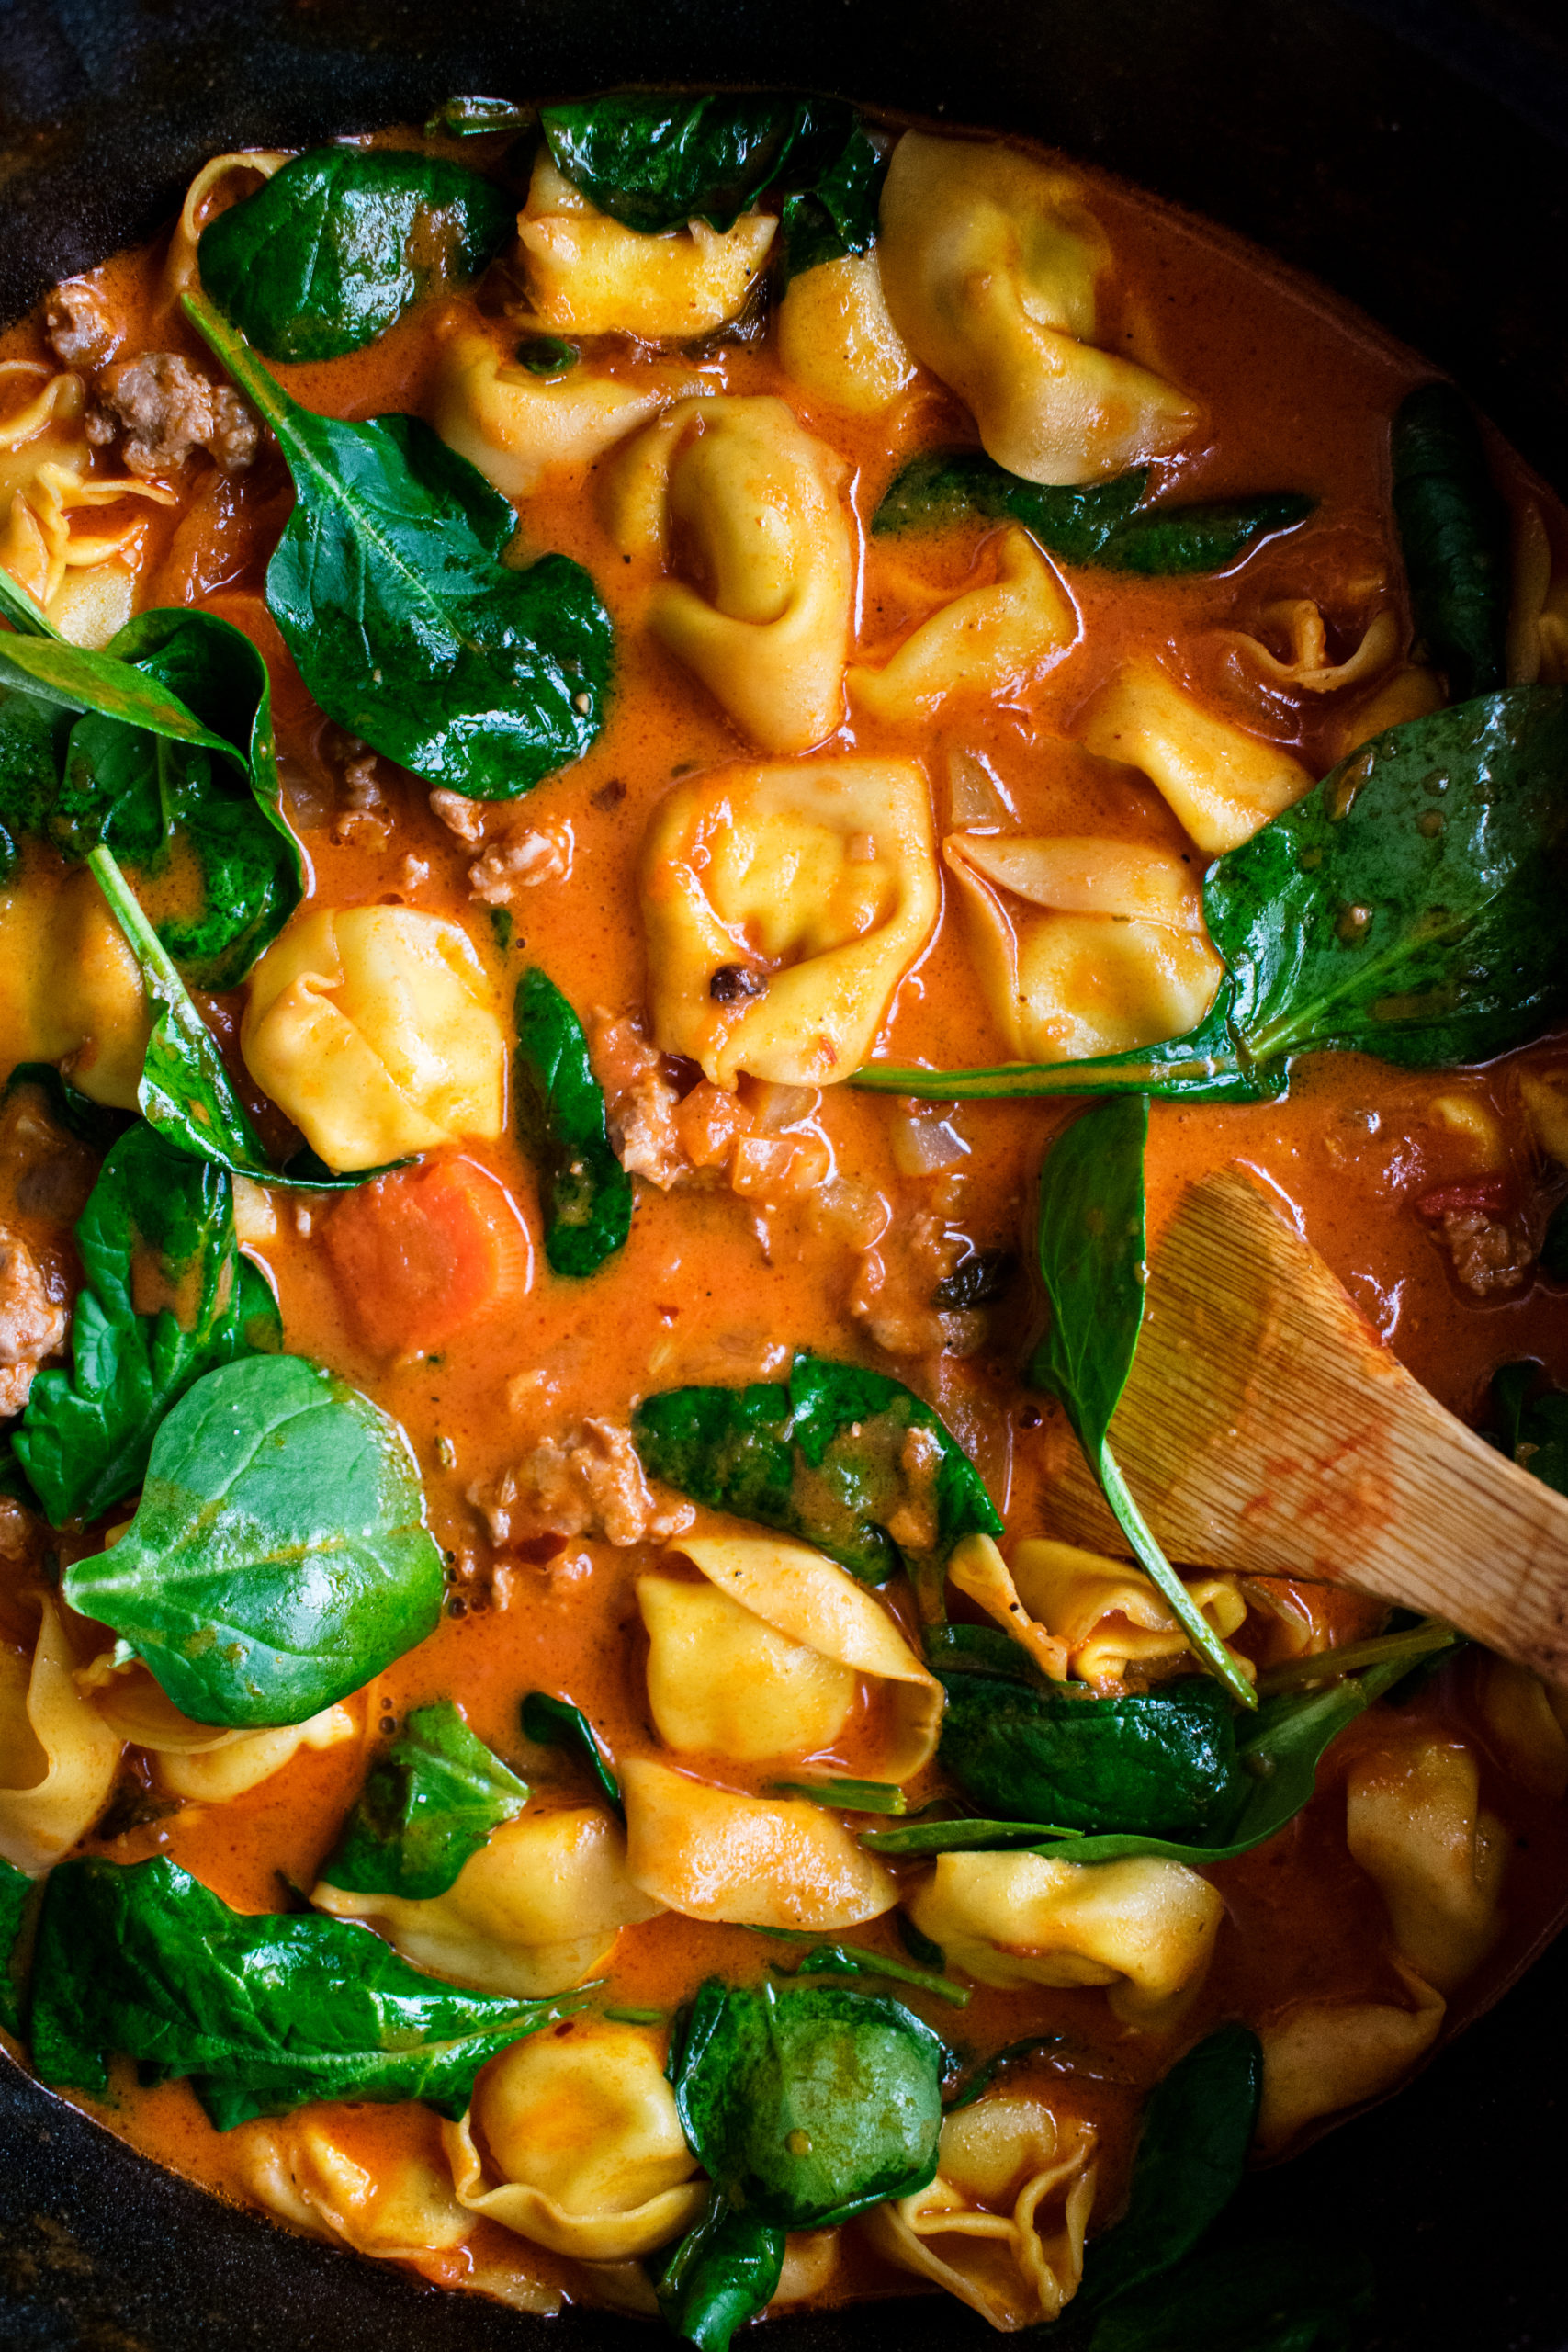 Creamy Tortellini Soup with Sausage & Spinach - The Original Dish